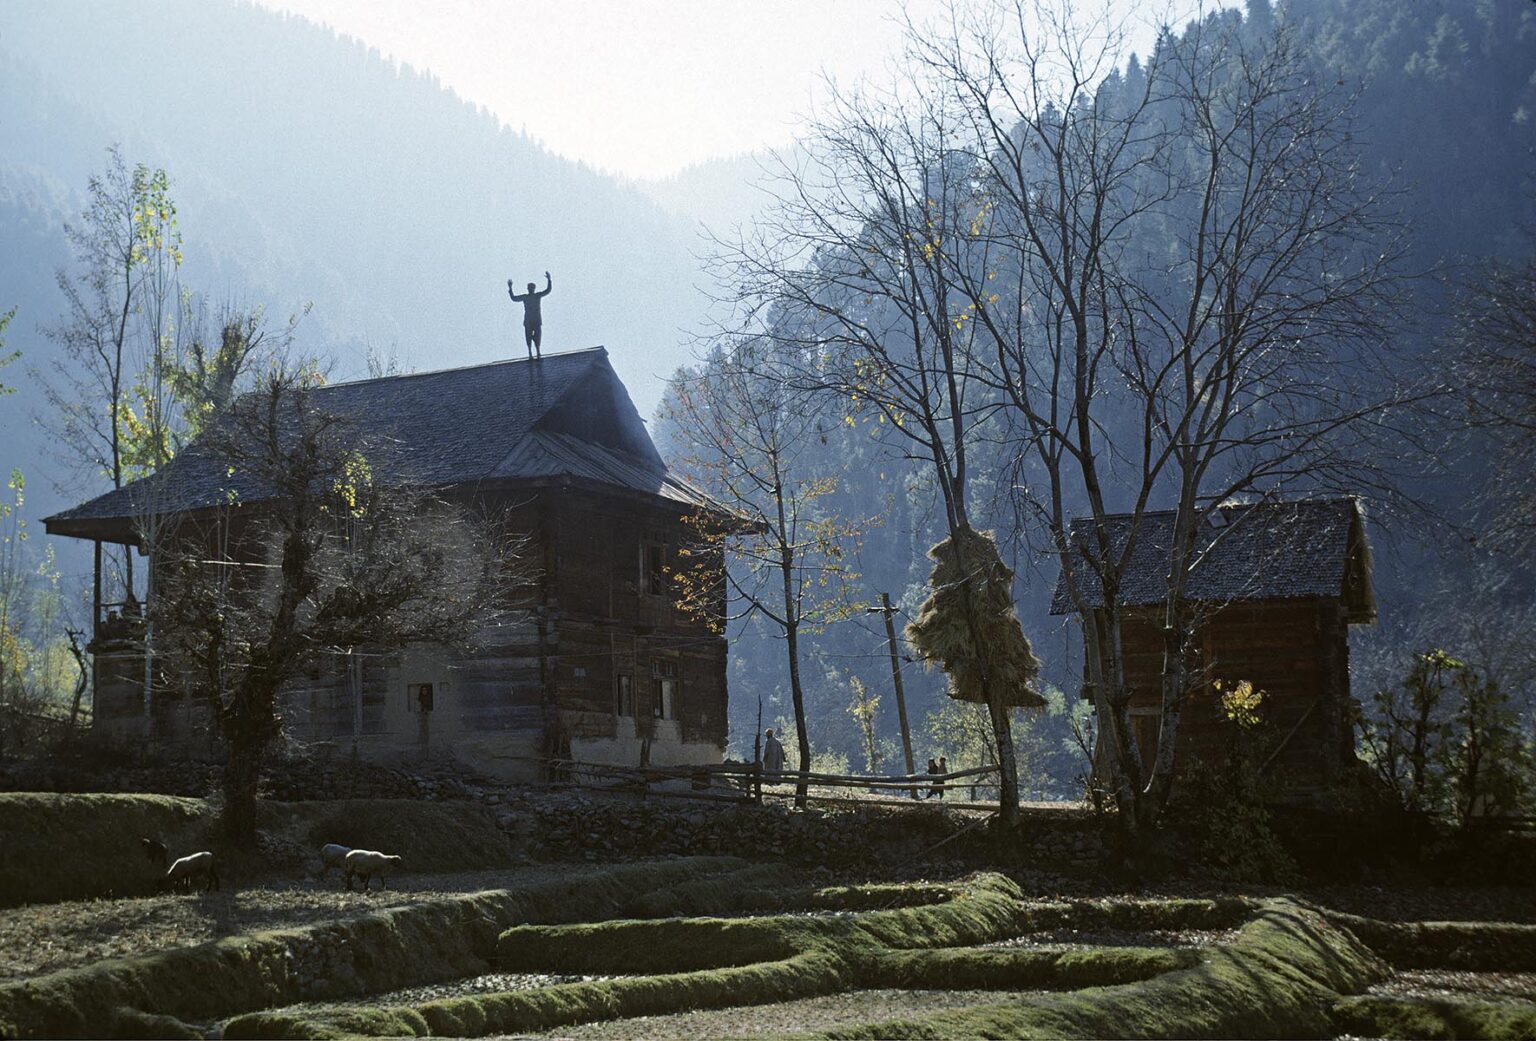 FALLOW FIELD and wooden FARM HOUSE near AFAN VILLAGE in the HIMALAYAN FOOTHILLS - KASHMIR, INDIA